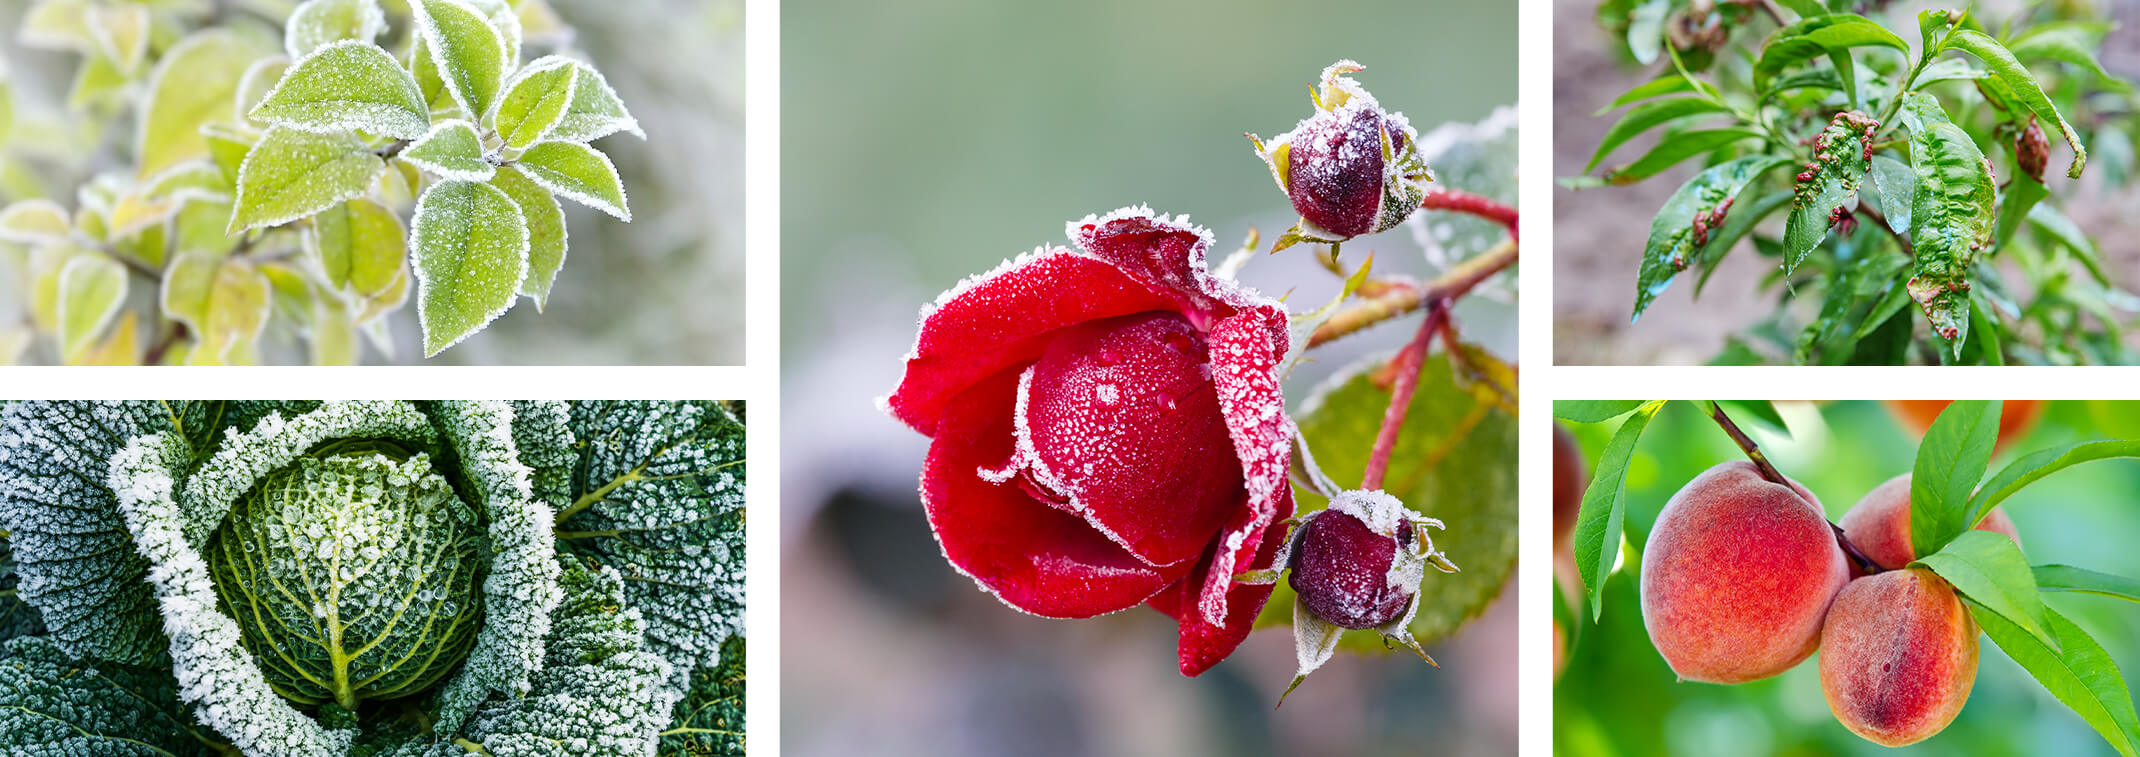 5 images - light green leaves covered in frost; cabbage covered in frost; a red rose and buds covered in frost; peach leaf curl on a peach tree; and healthy peaches growing on a tree